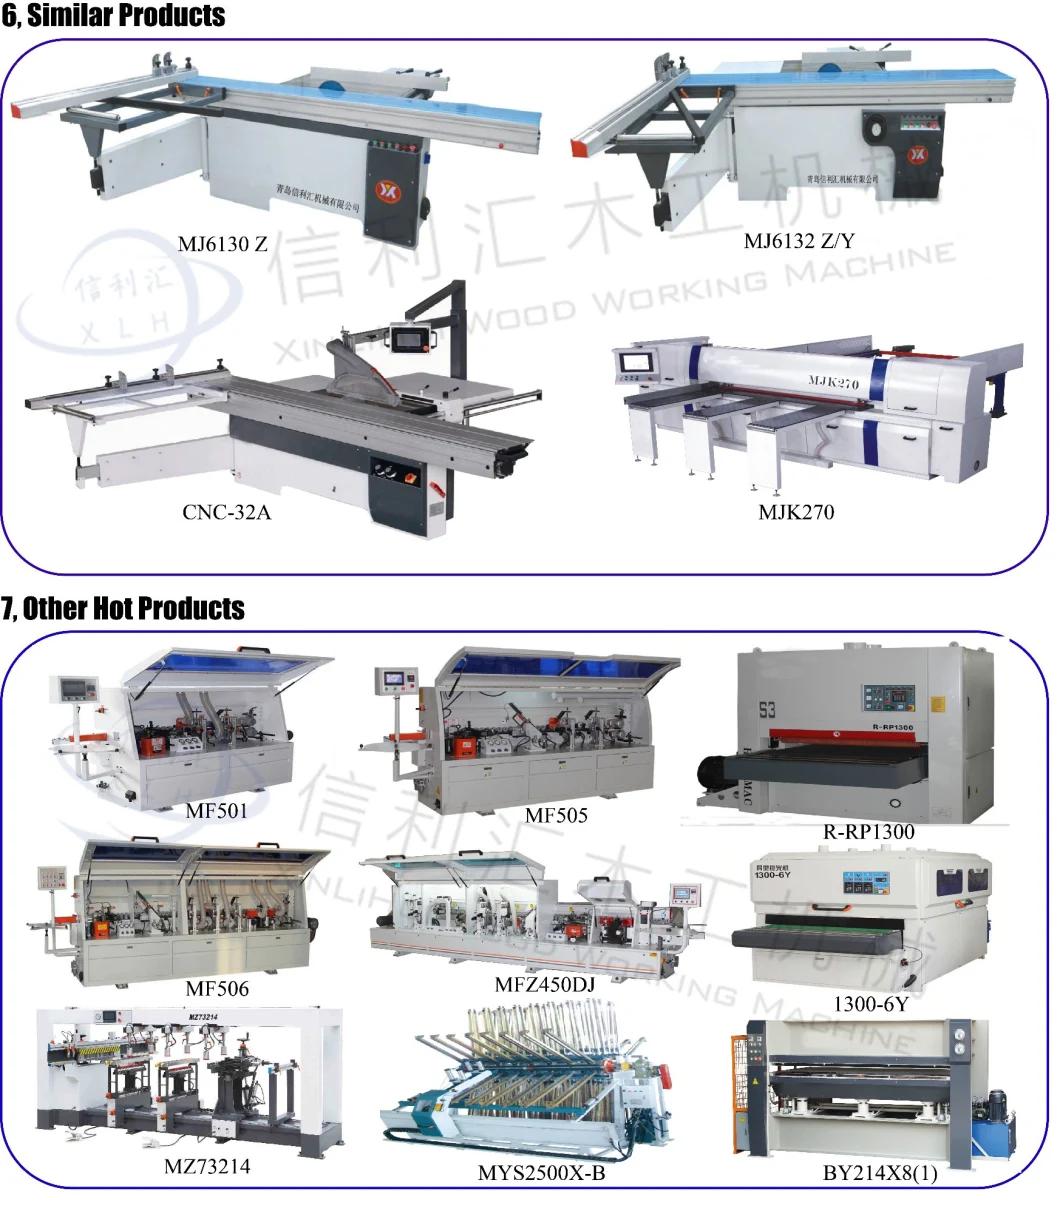 1300 or 1600 Sliding Table Panel Saw with Scoring Unit. Single Phase Motor. Woodworking Machinery Panel Saw, Panel Saw Machine, Panel Saw Machine 1600